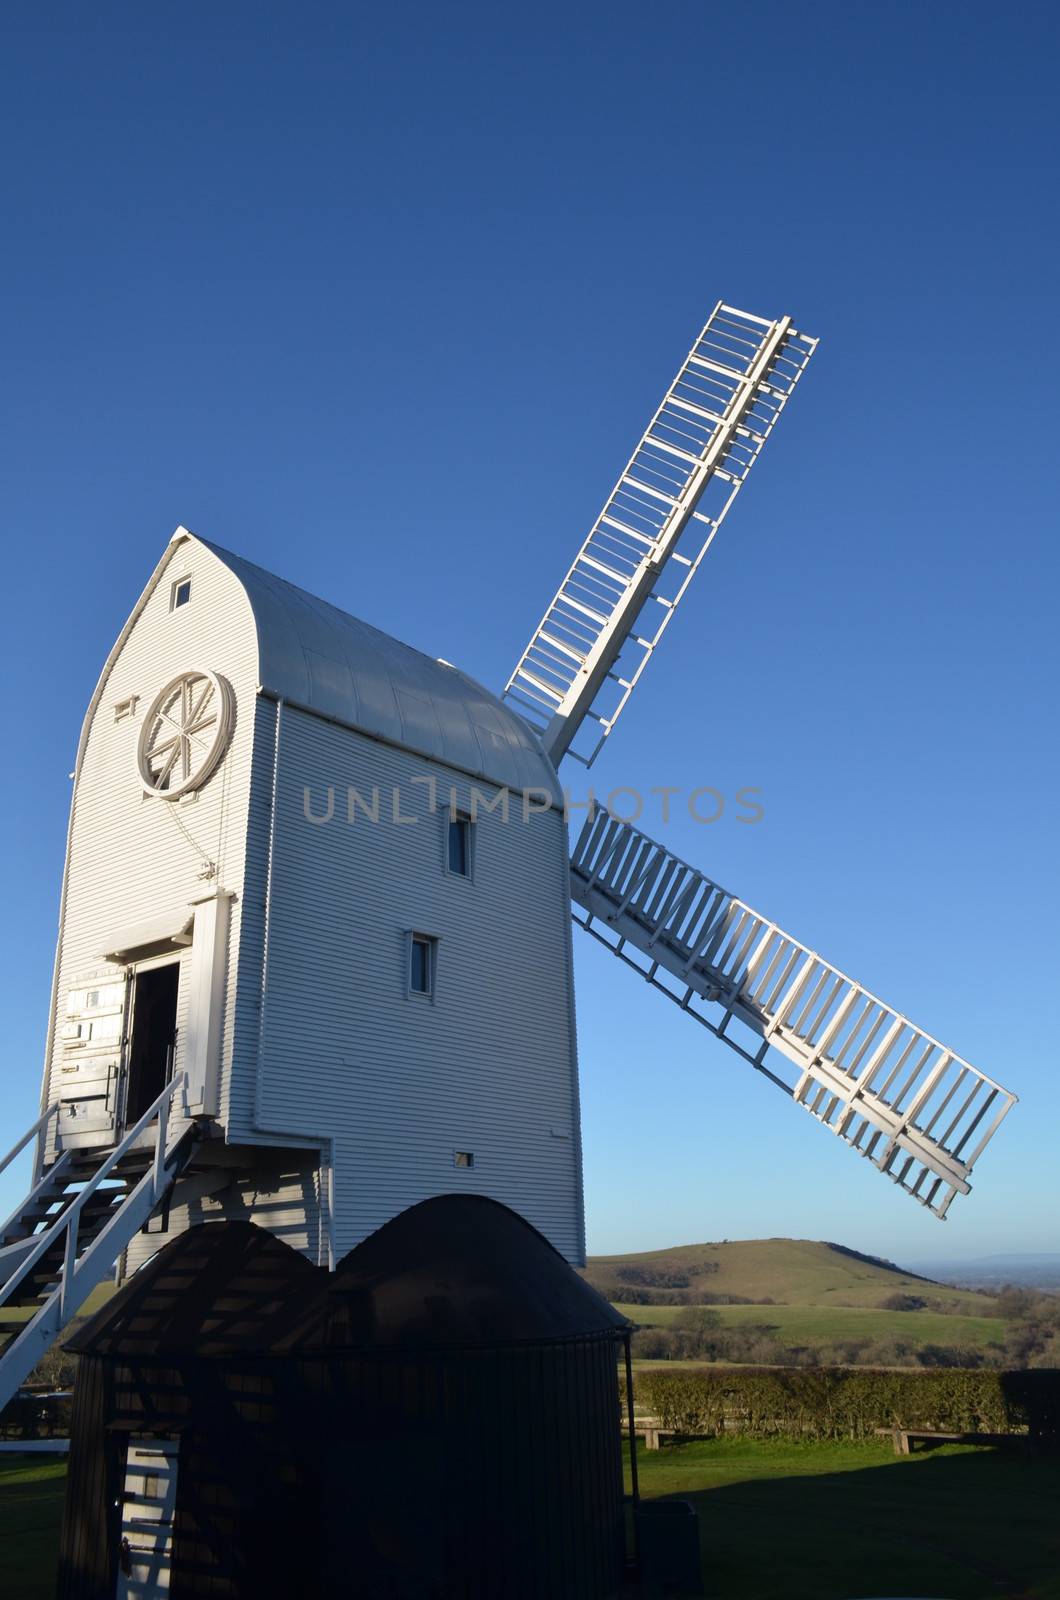 English Windmill by bunsview